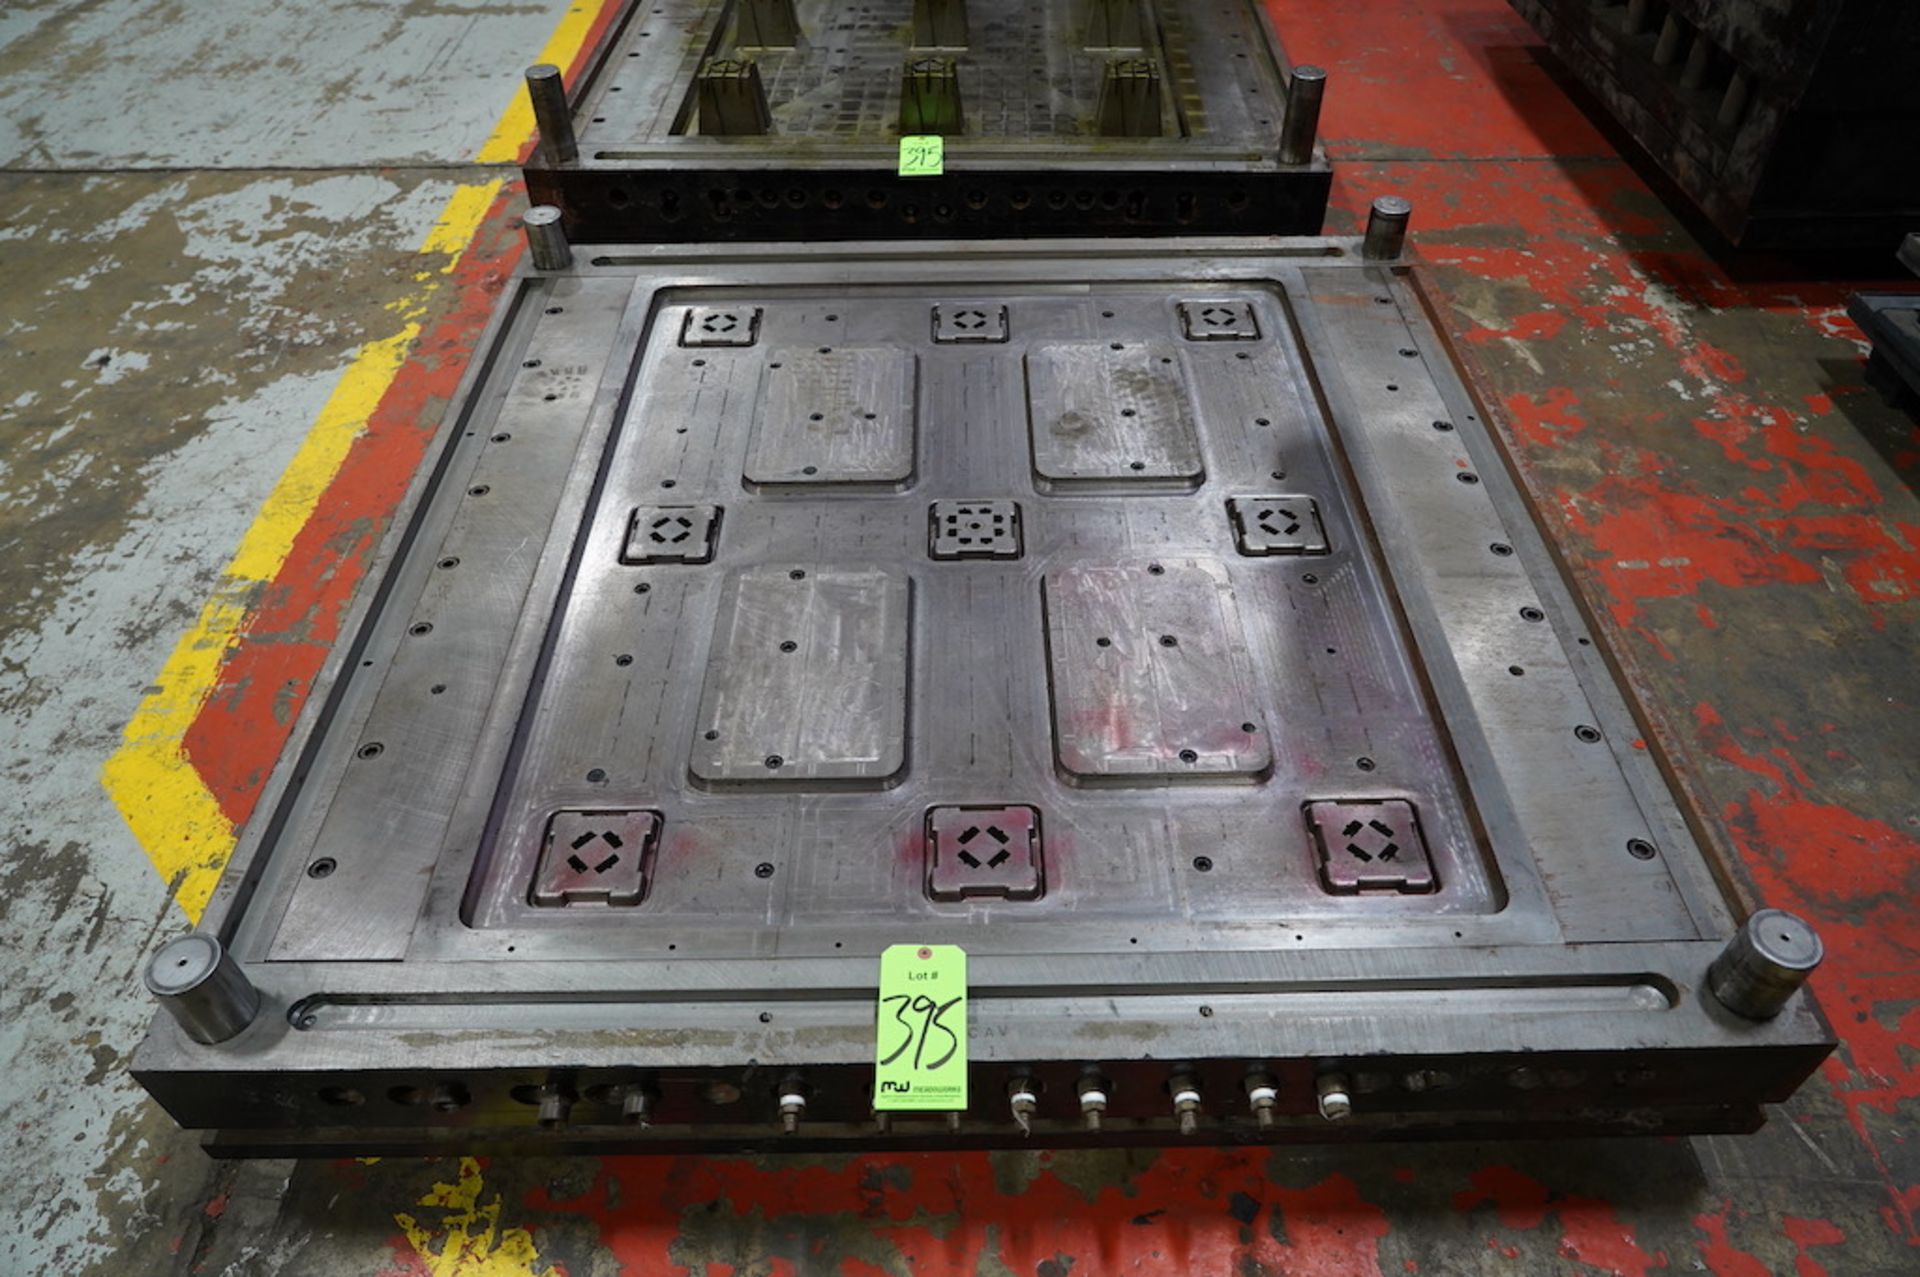 40" x 48" Plastic Pallet Mold w/(2) Molds - (1) For 40" x 48" Pallet, (1) For Snap-In Piece to make - Image 5 of 7